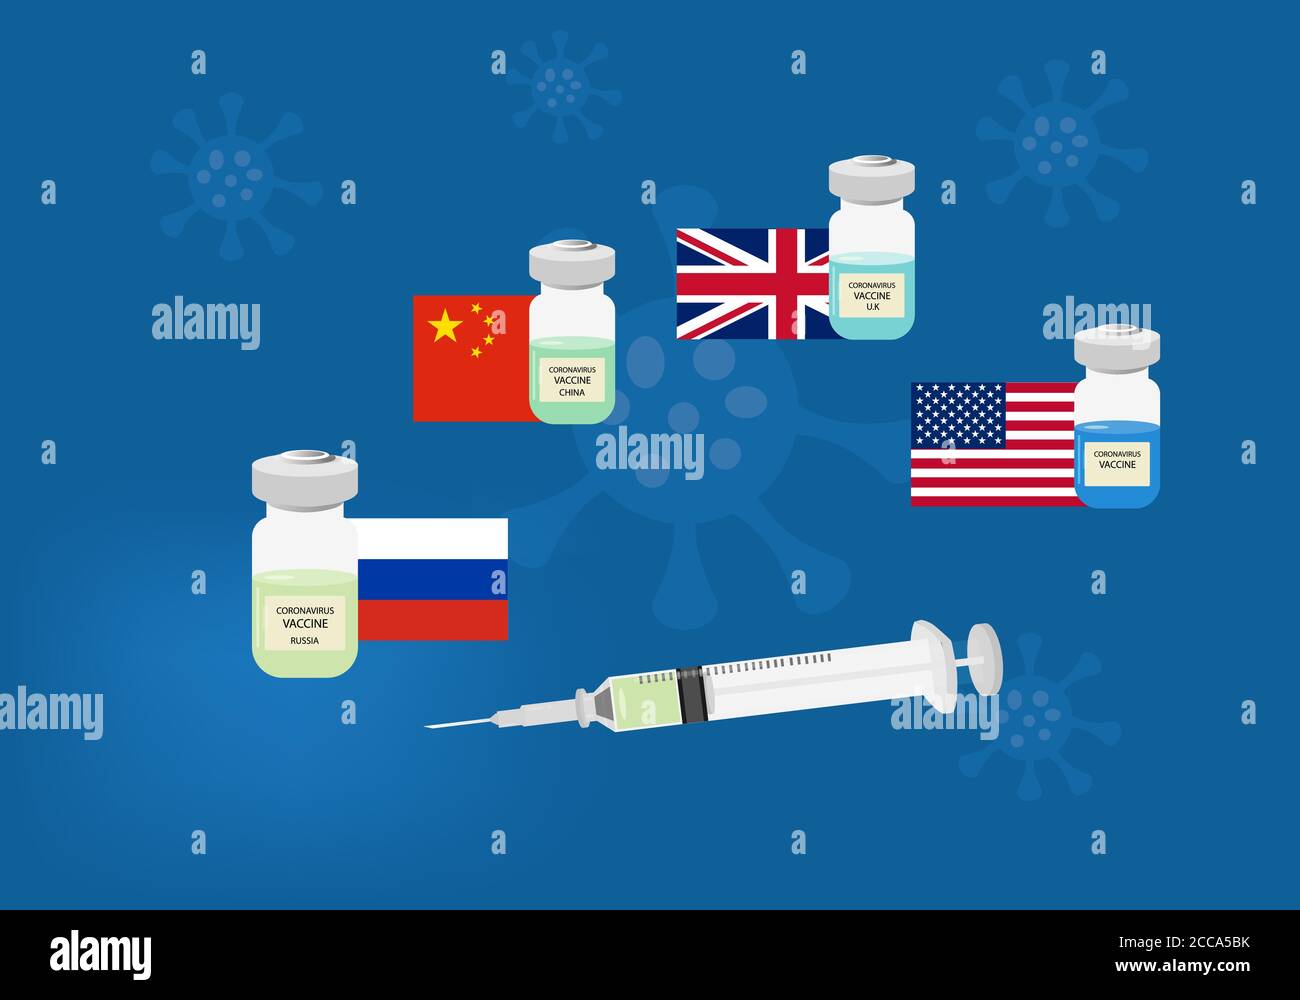 Coronavirus vaccine recently developed from different countries. Illustration of syringe and vaccine bottles, Russia, China, United Kingdom and USA fl Stock Vector